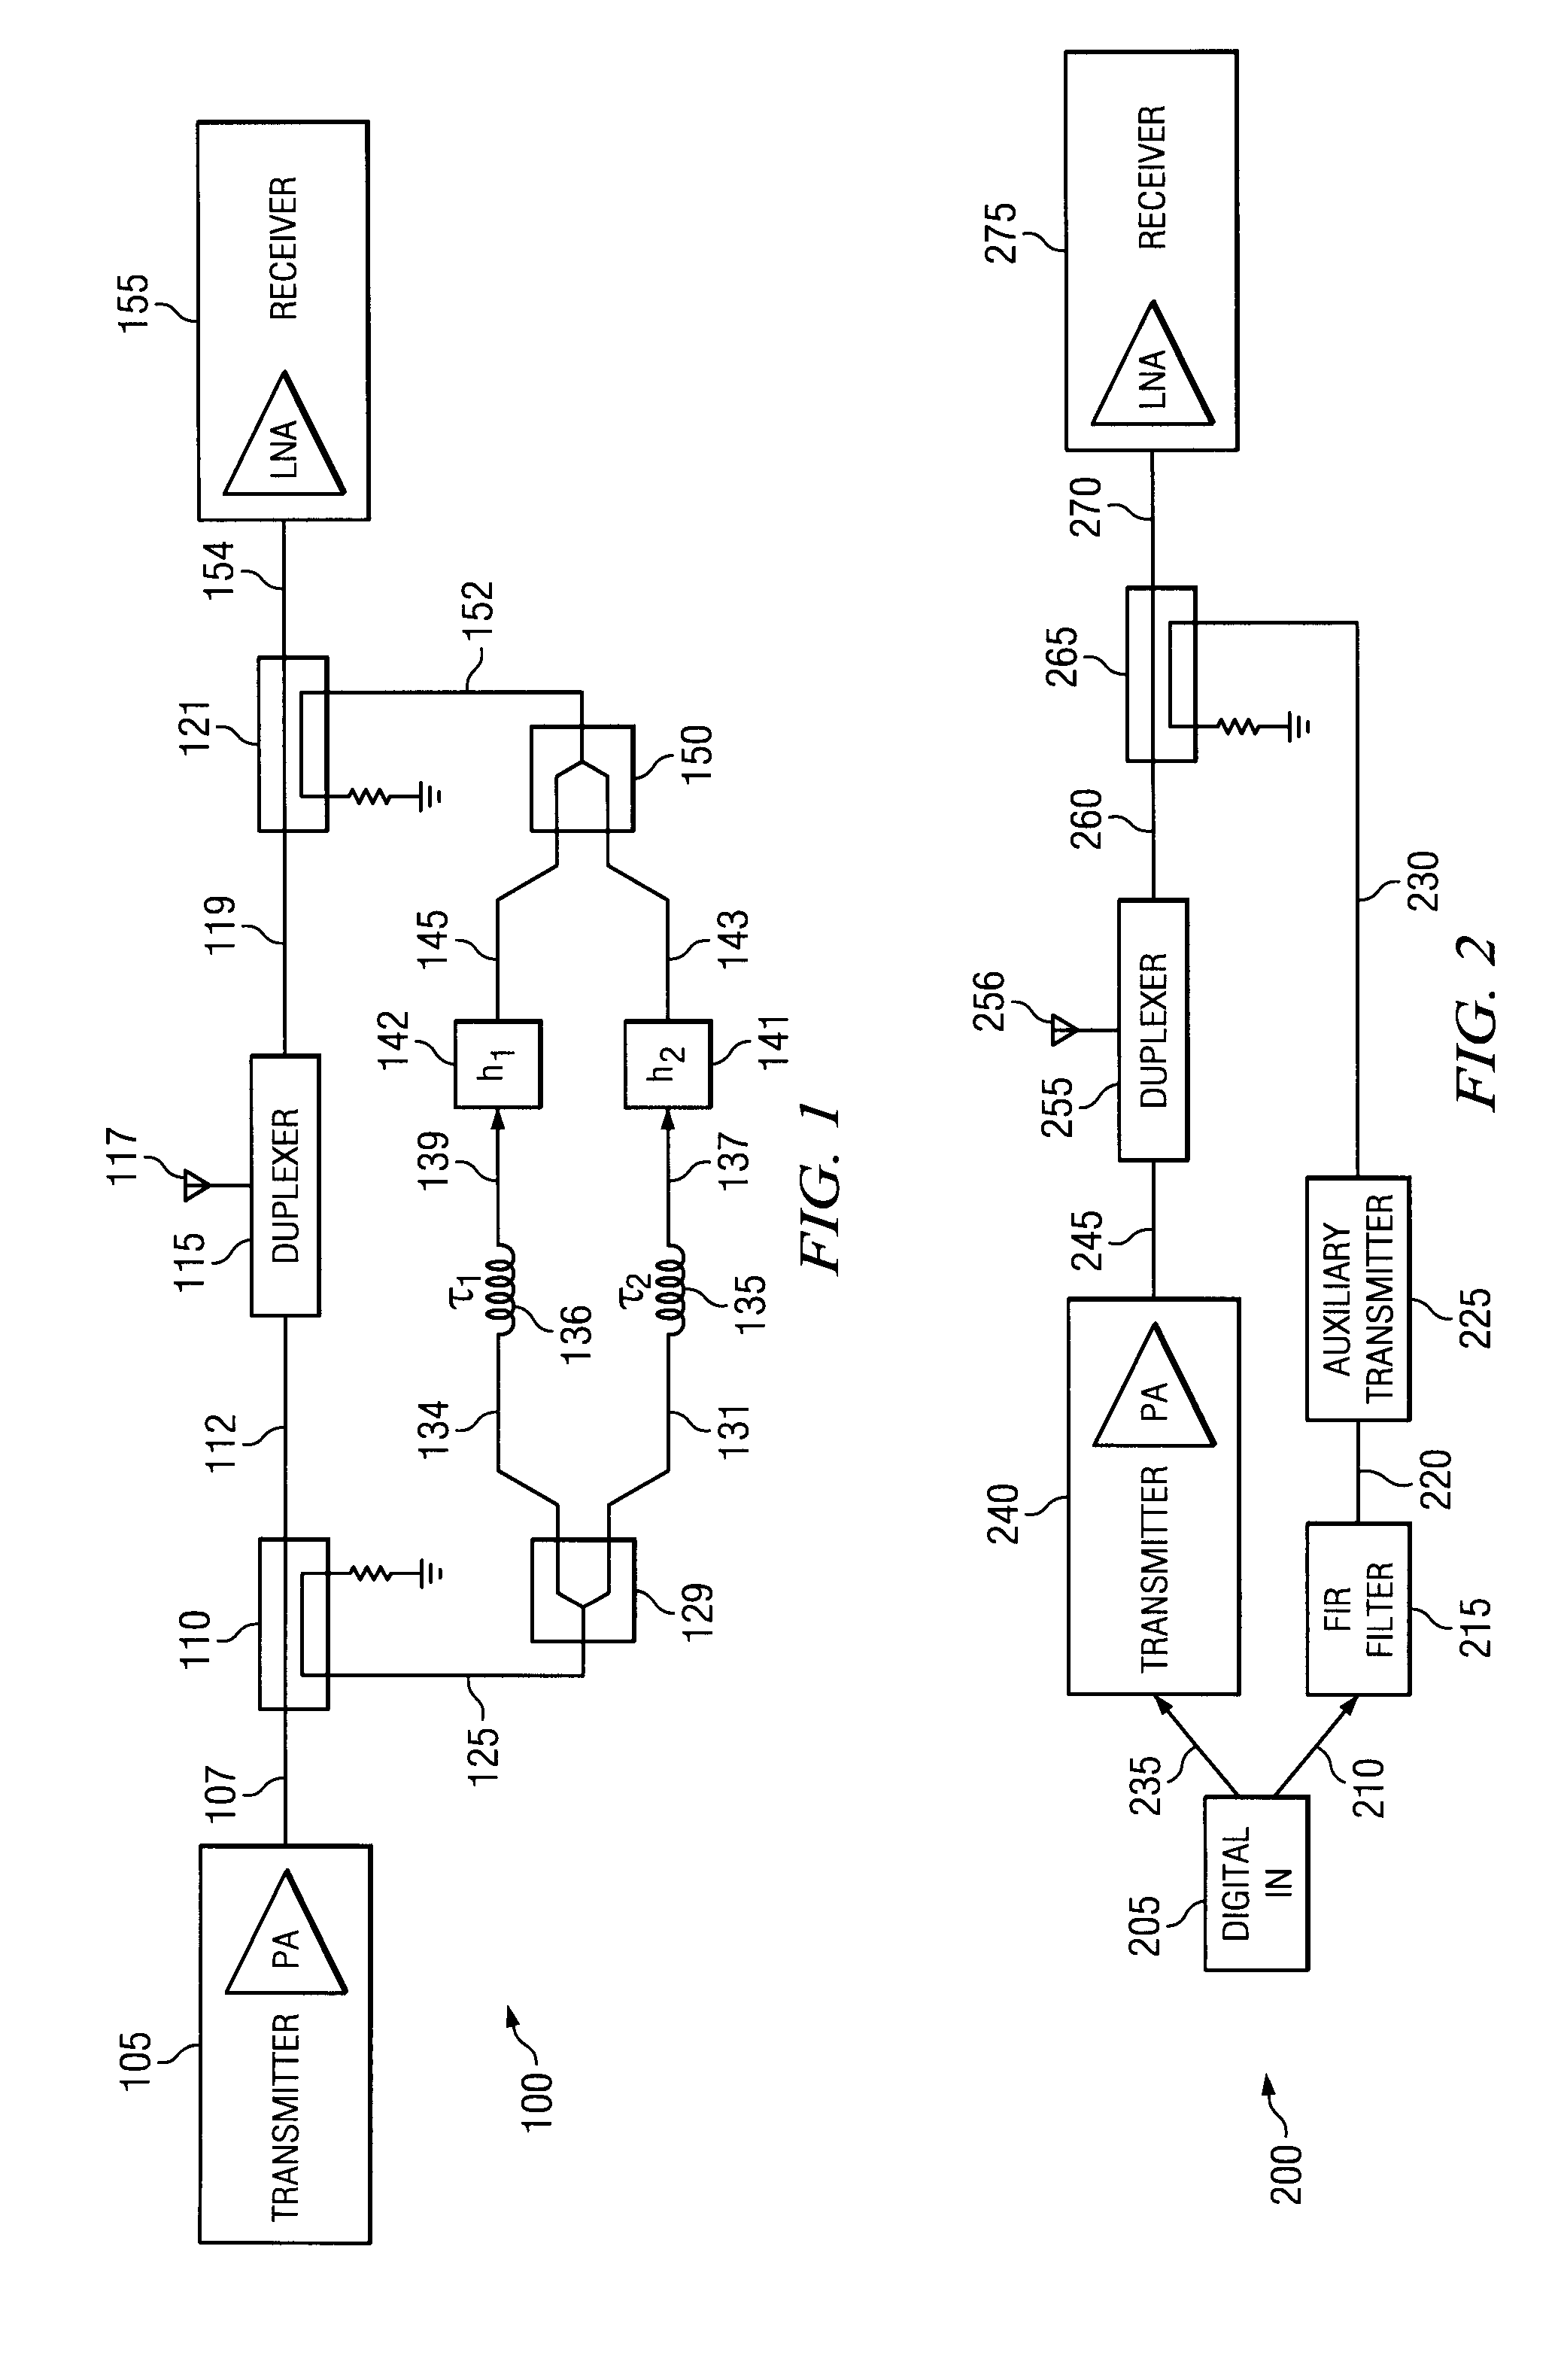 Frequency Agile Filter Using a Digital Filter and Bandstop Filtering